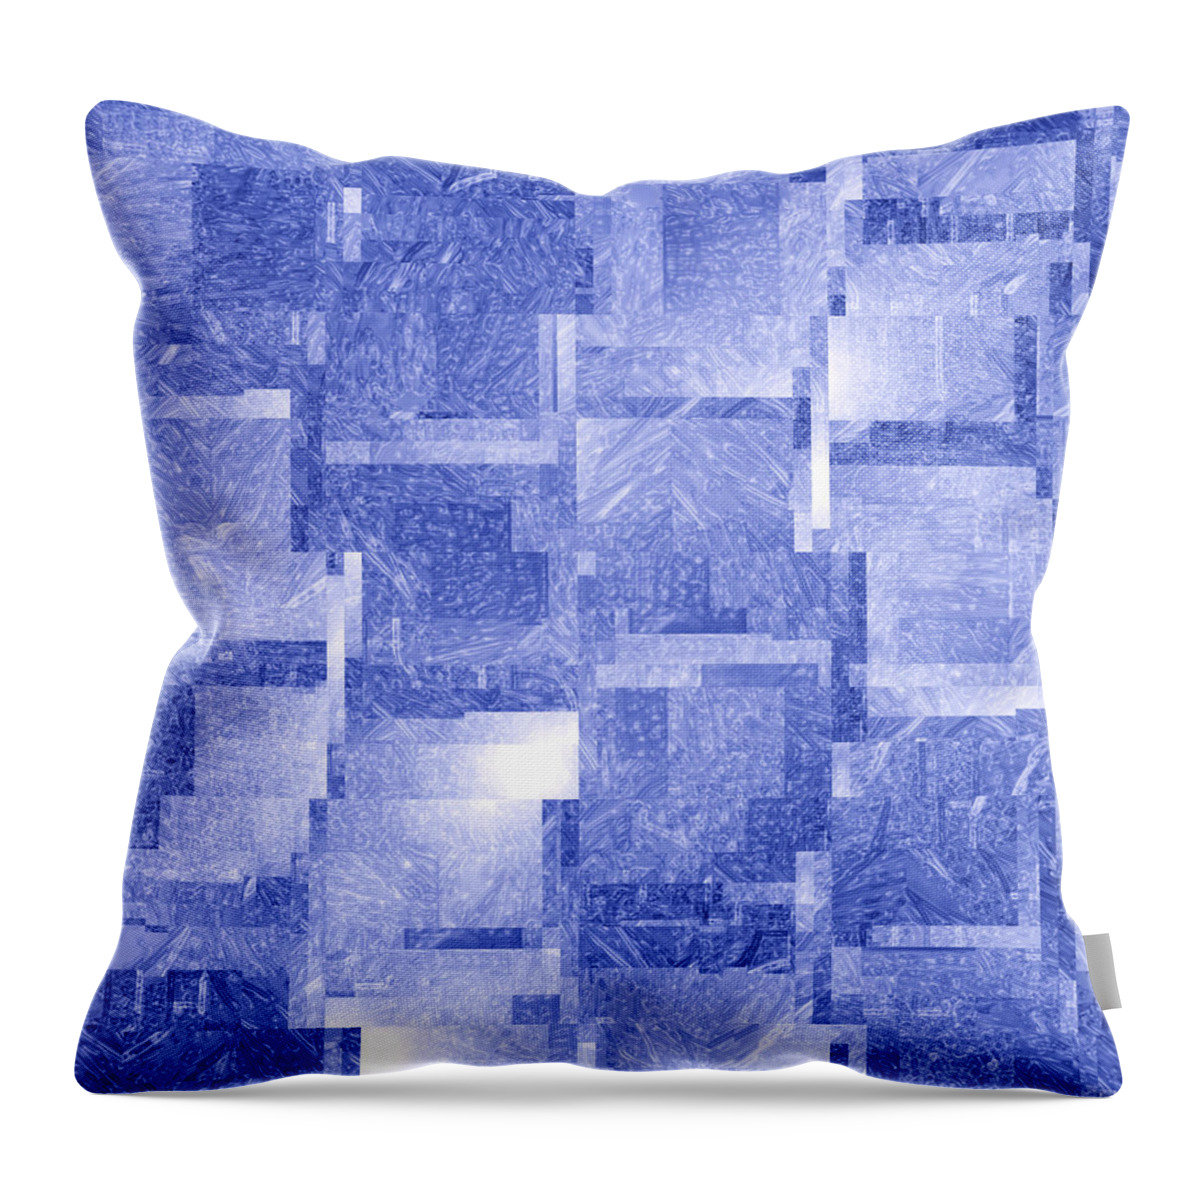 Moveonart! coolerherenow Digital Abstract Art By Artist Jacob Kane Kanduch -- Omnetra Throw Pillow featuring the digital art MoveOnArt CoolerHereNow by MovesOnArt Jacob